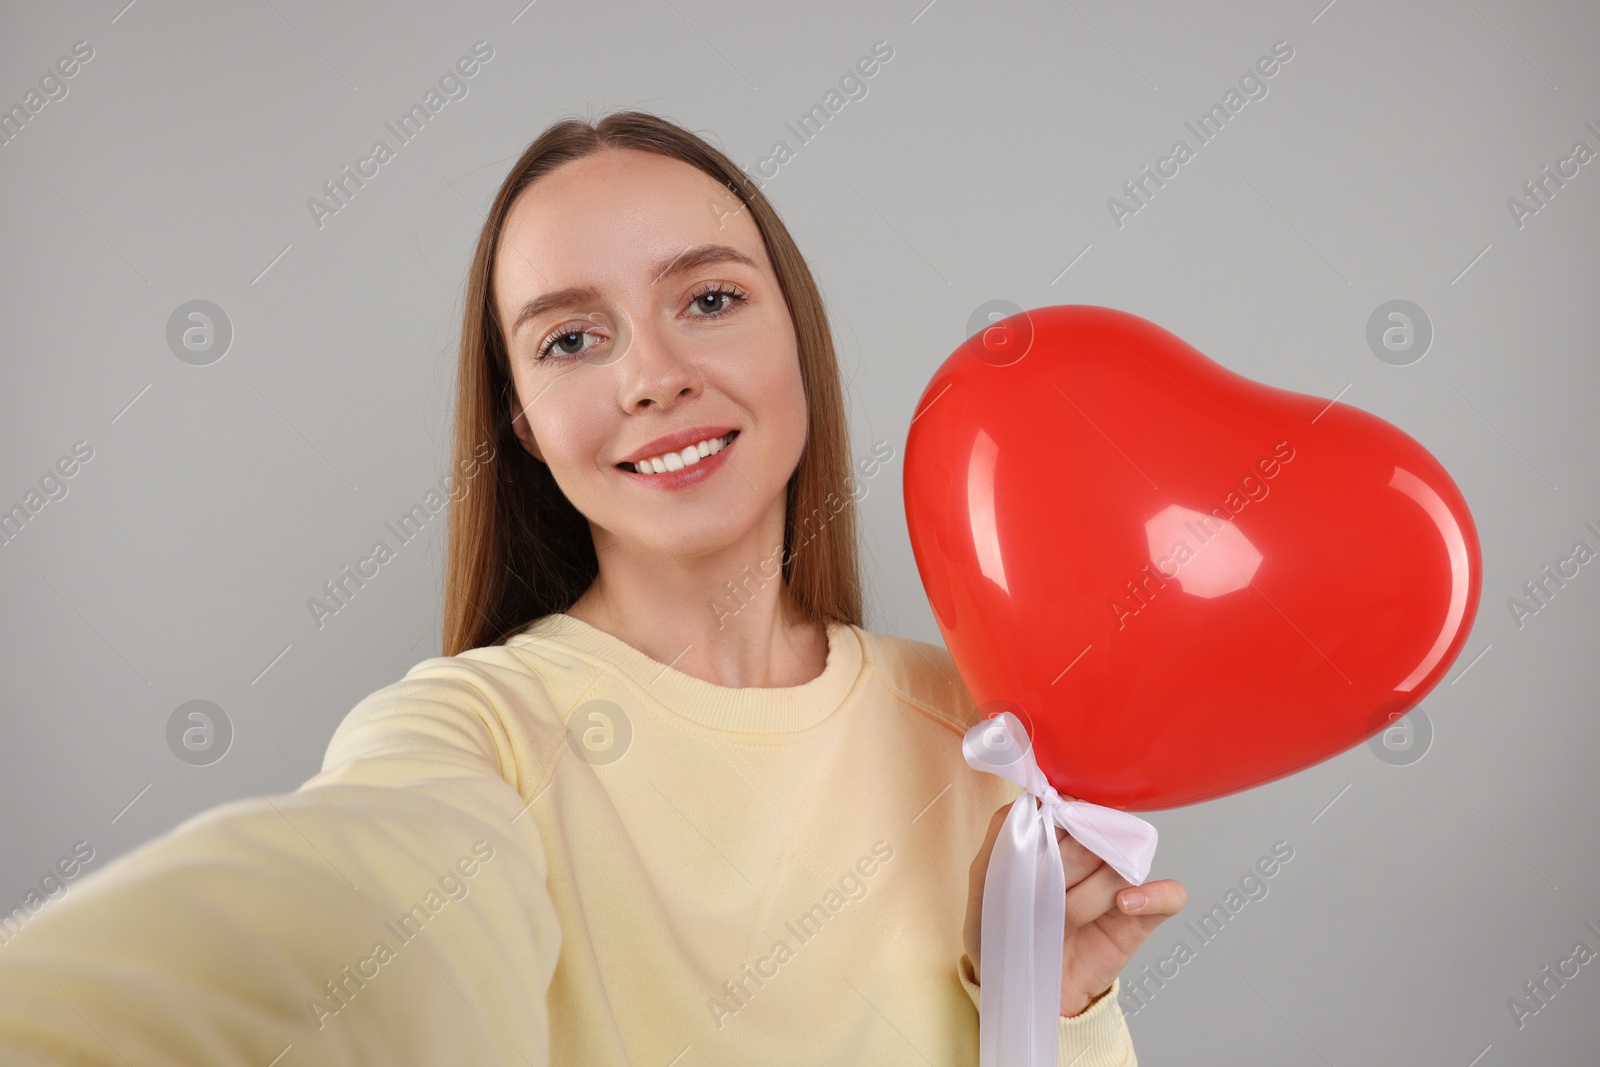 Photo of Happy young woman holding red heart shaped balloon and taking selfie on light grey background